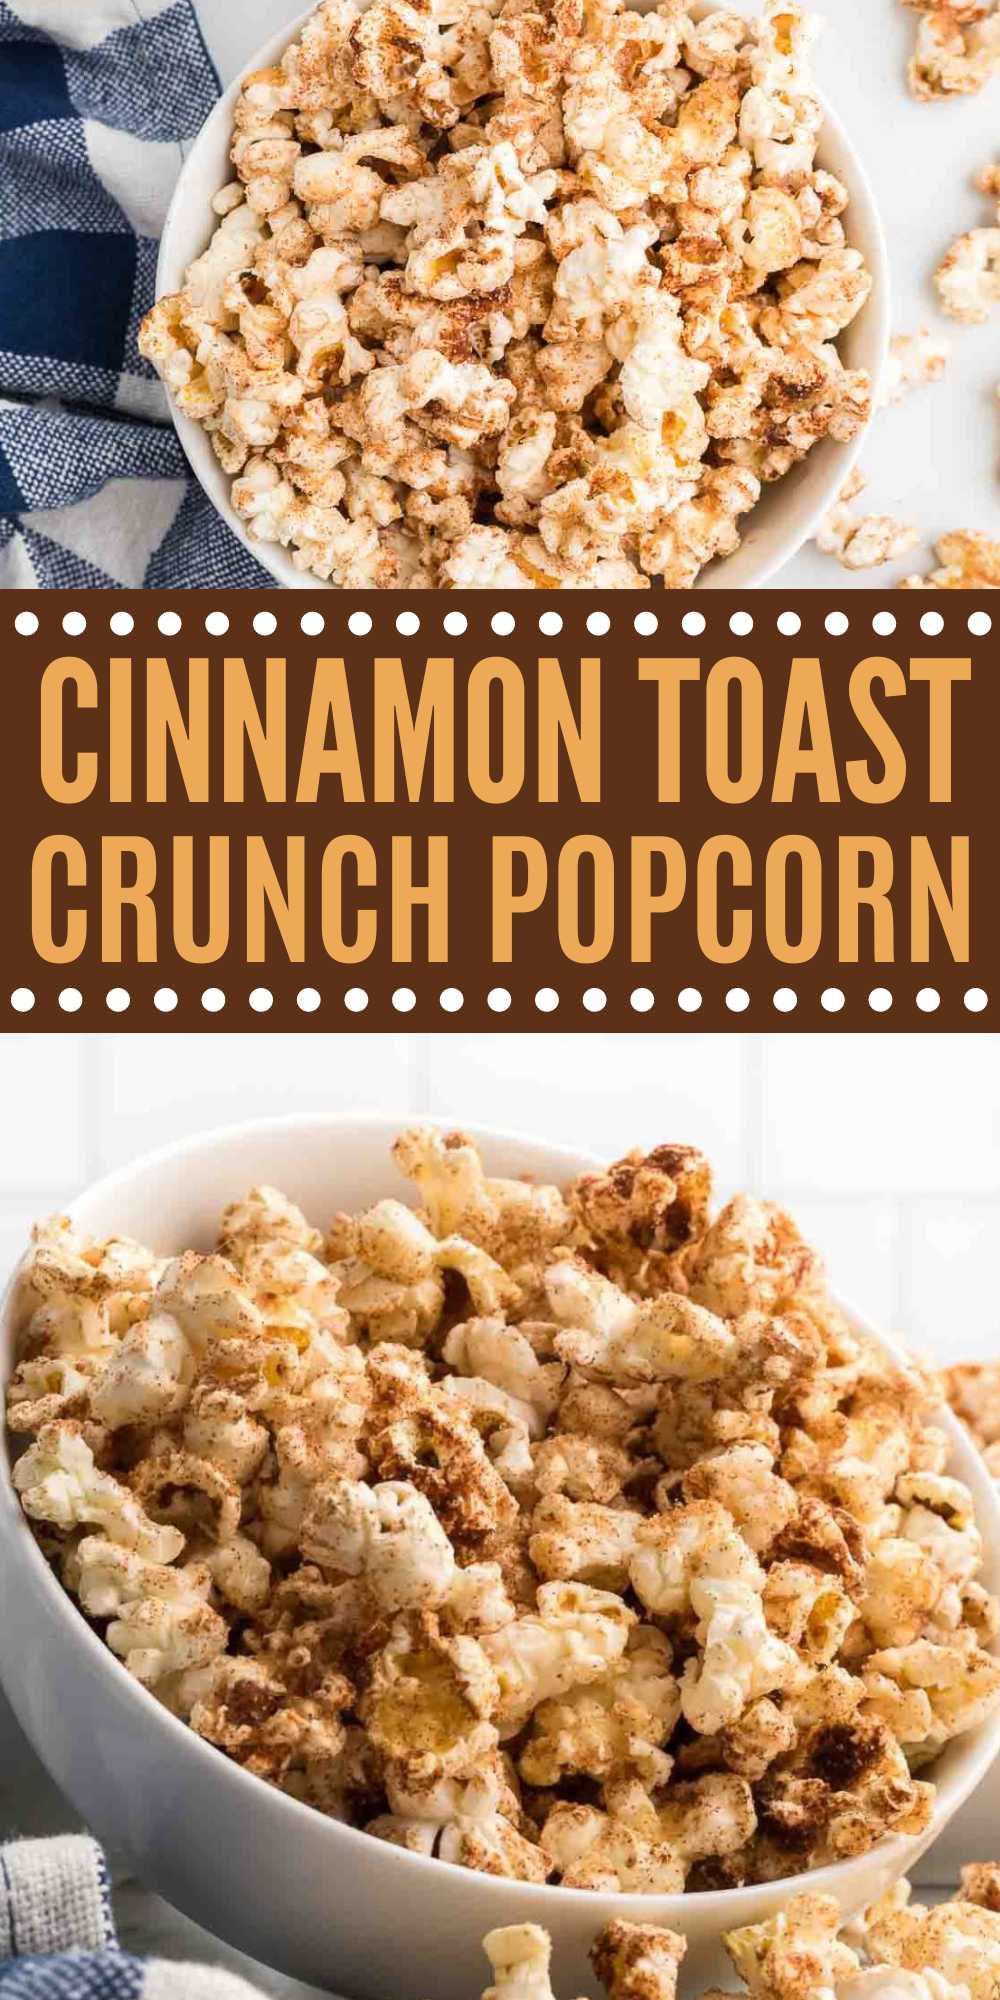 Cinnamon Toast Crunch Popcorn is the perfect combination of sweet and salty. A quick and easy snack for movie night or for a party. If you love Cinnamon Toast Crunch cereal than you are going to love this popcorn. It is loaded with cinnamon and sugar to make the perfect quick and easy snack. #eatingonadime #cinnamontoastcrunchpopcorn #cinnamonpopcorn